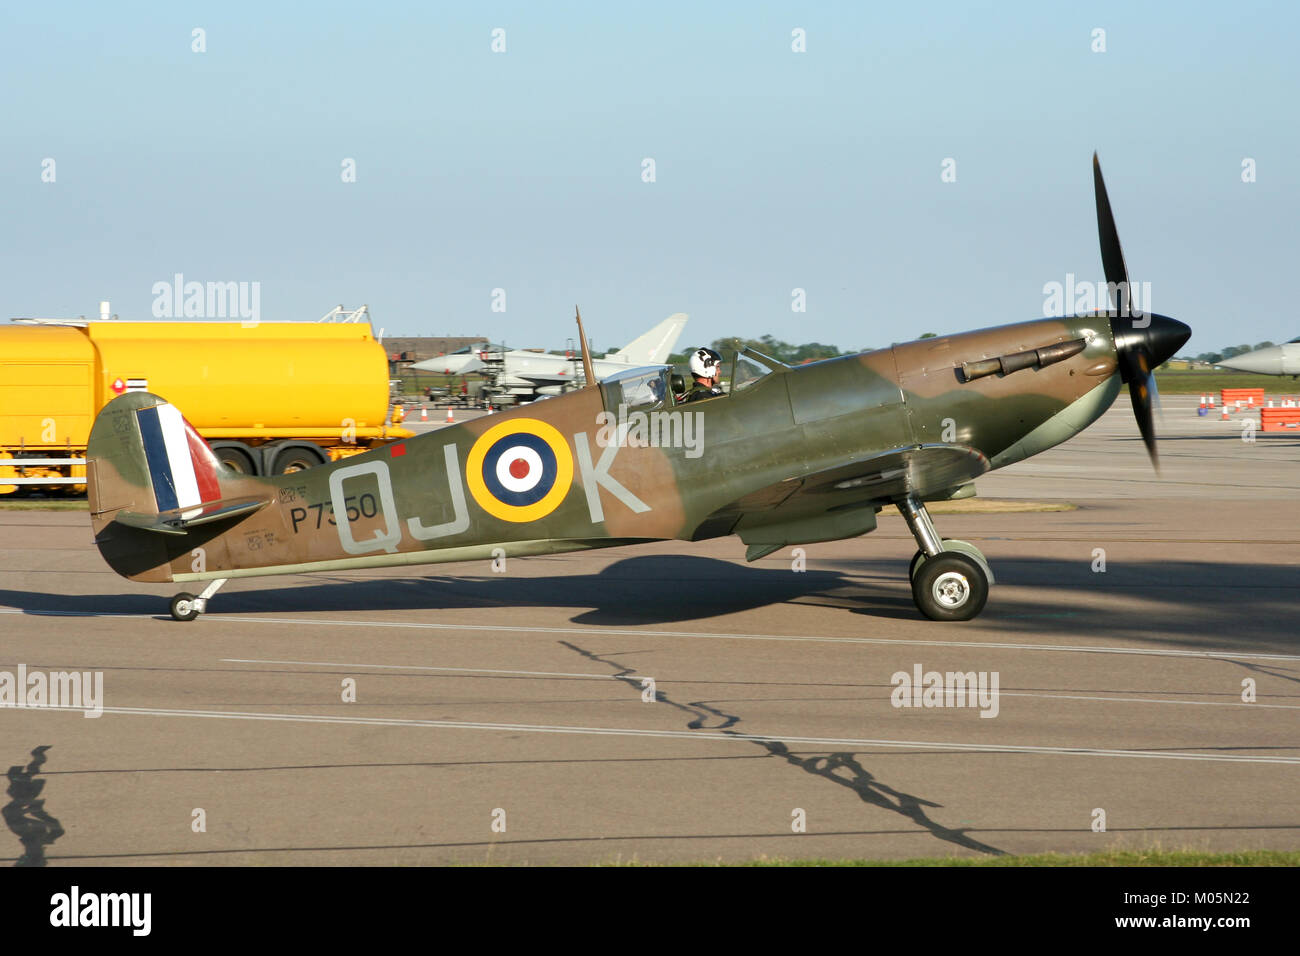 The RAF Battle of Britain Memorial Flights veteran Spitfire Mk IIa taxiing out on a summers evening at RAF Coningsby for a memorial flypast. Stock Photo